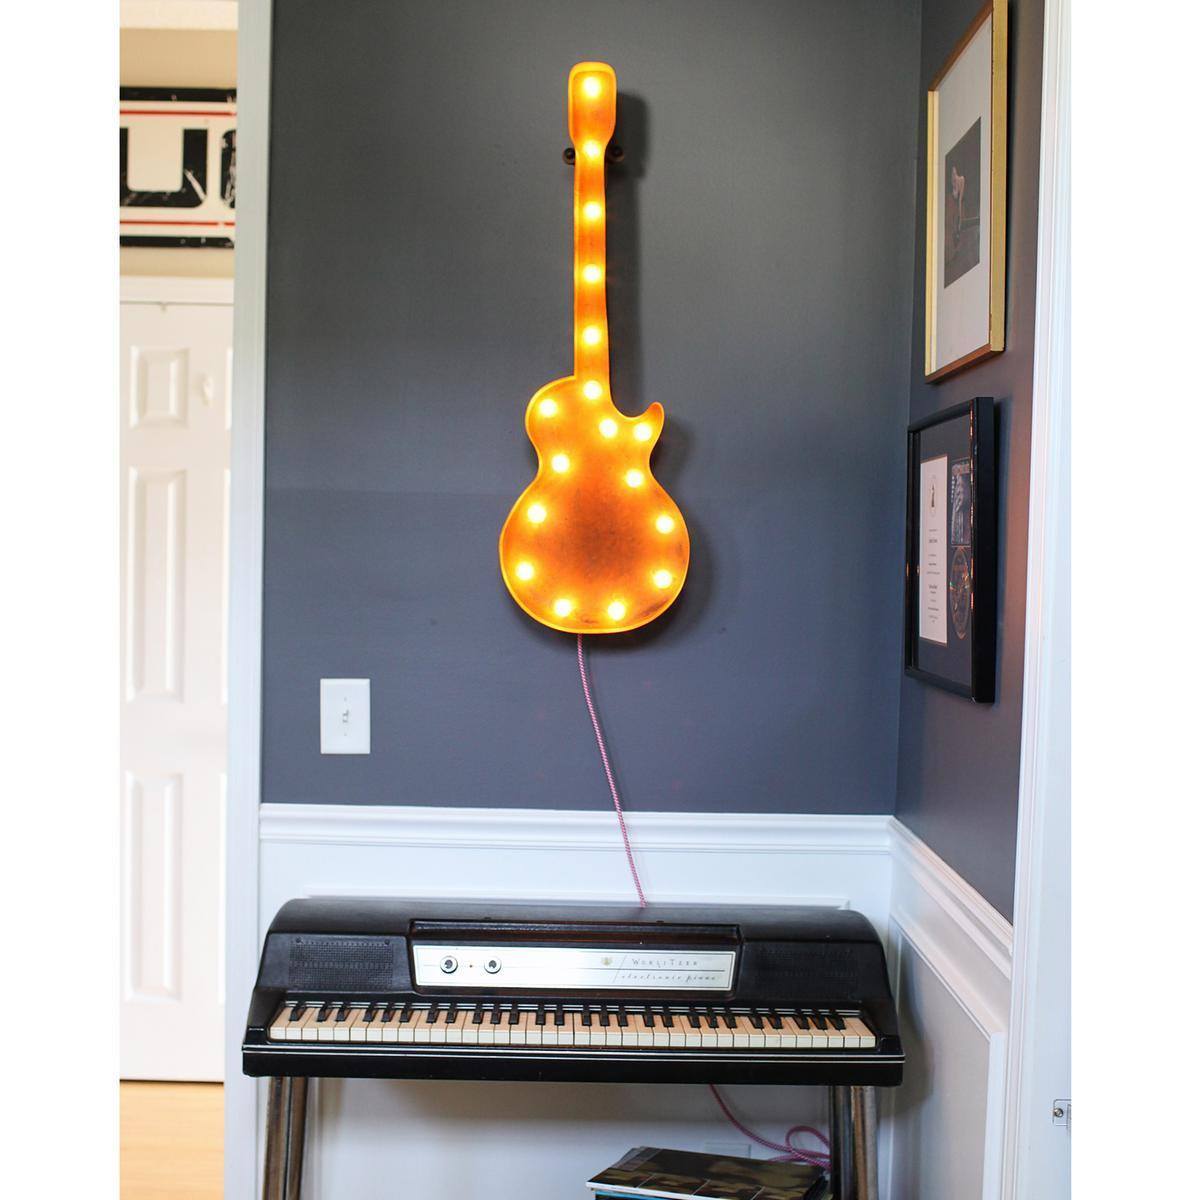 - Lights Marquee Marquee 36” Rusty The Large with Vintage - (Rustic) Marquee Sign Guitar Lights Online Buy